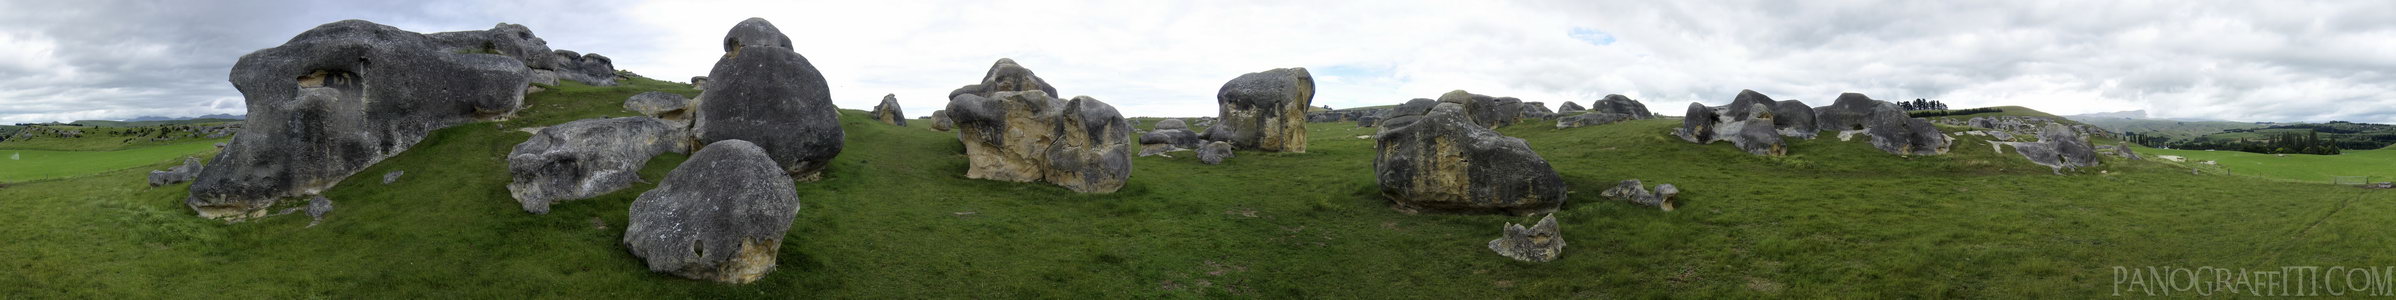 Waitaki Valley Elephant Rocks In 360 Degrees of HDR - Stitched Panorama